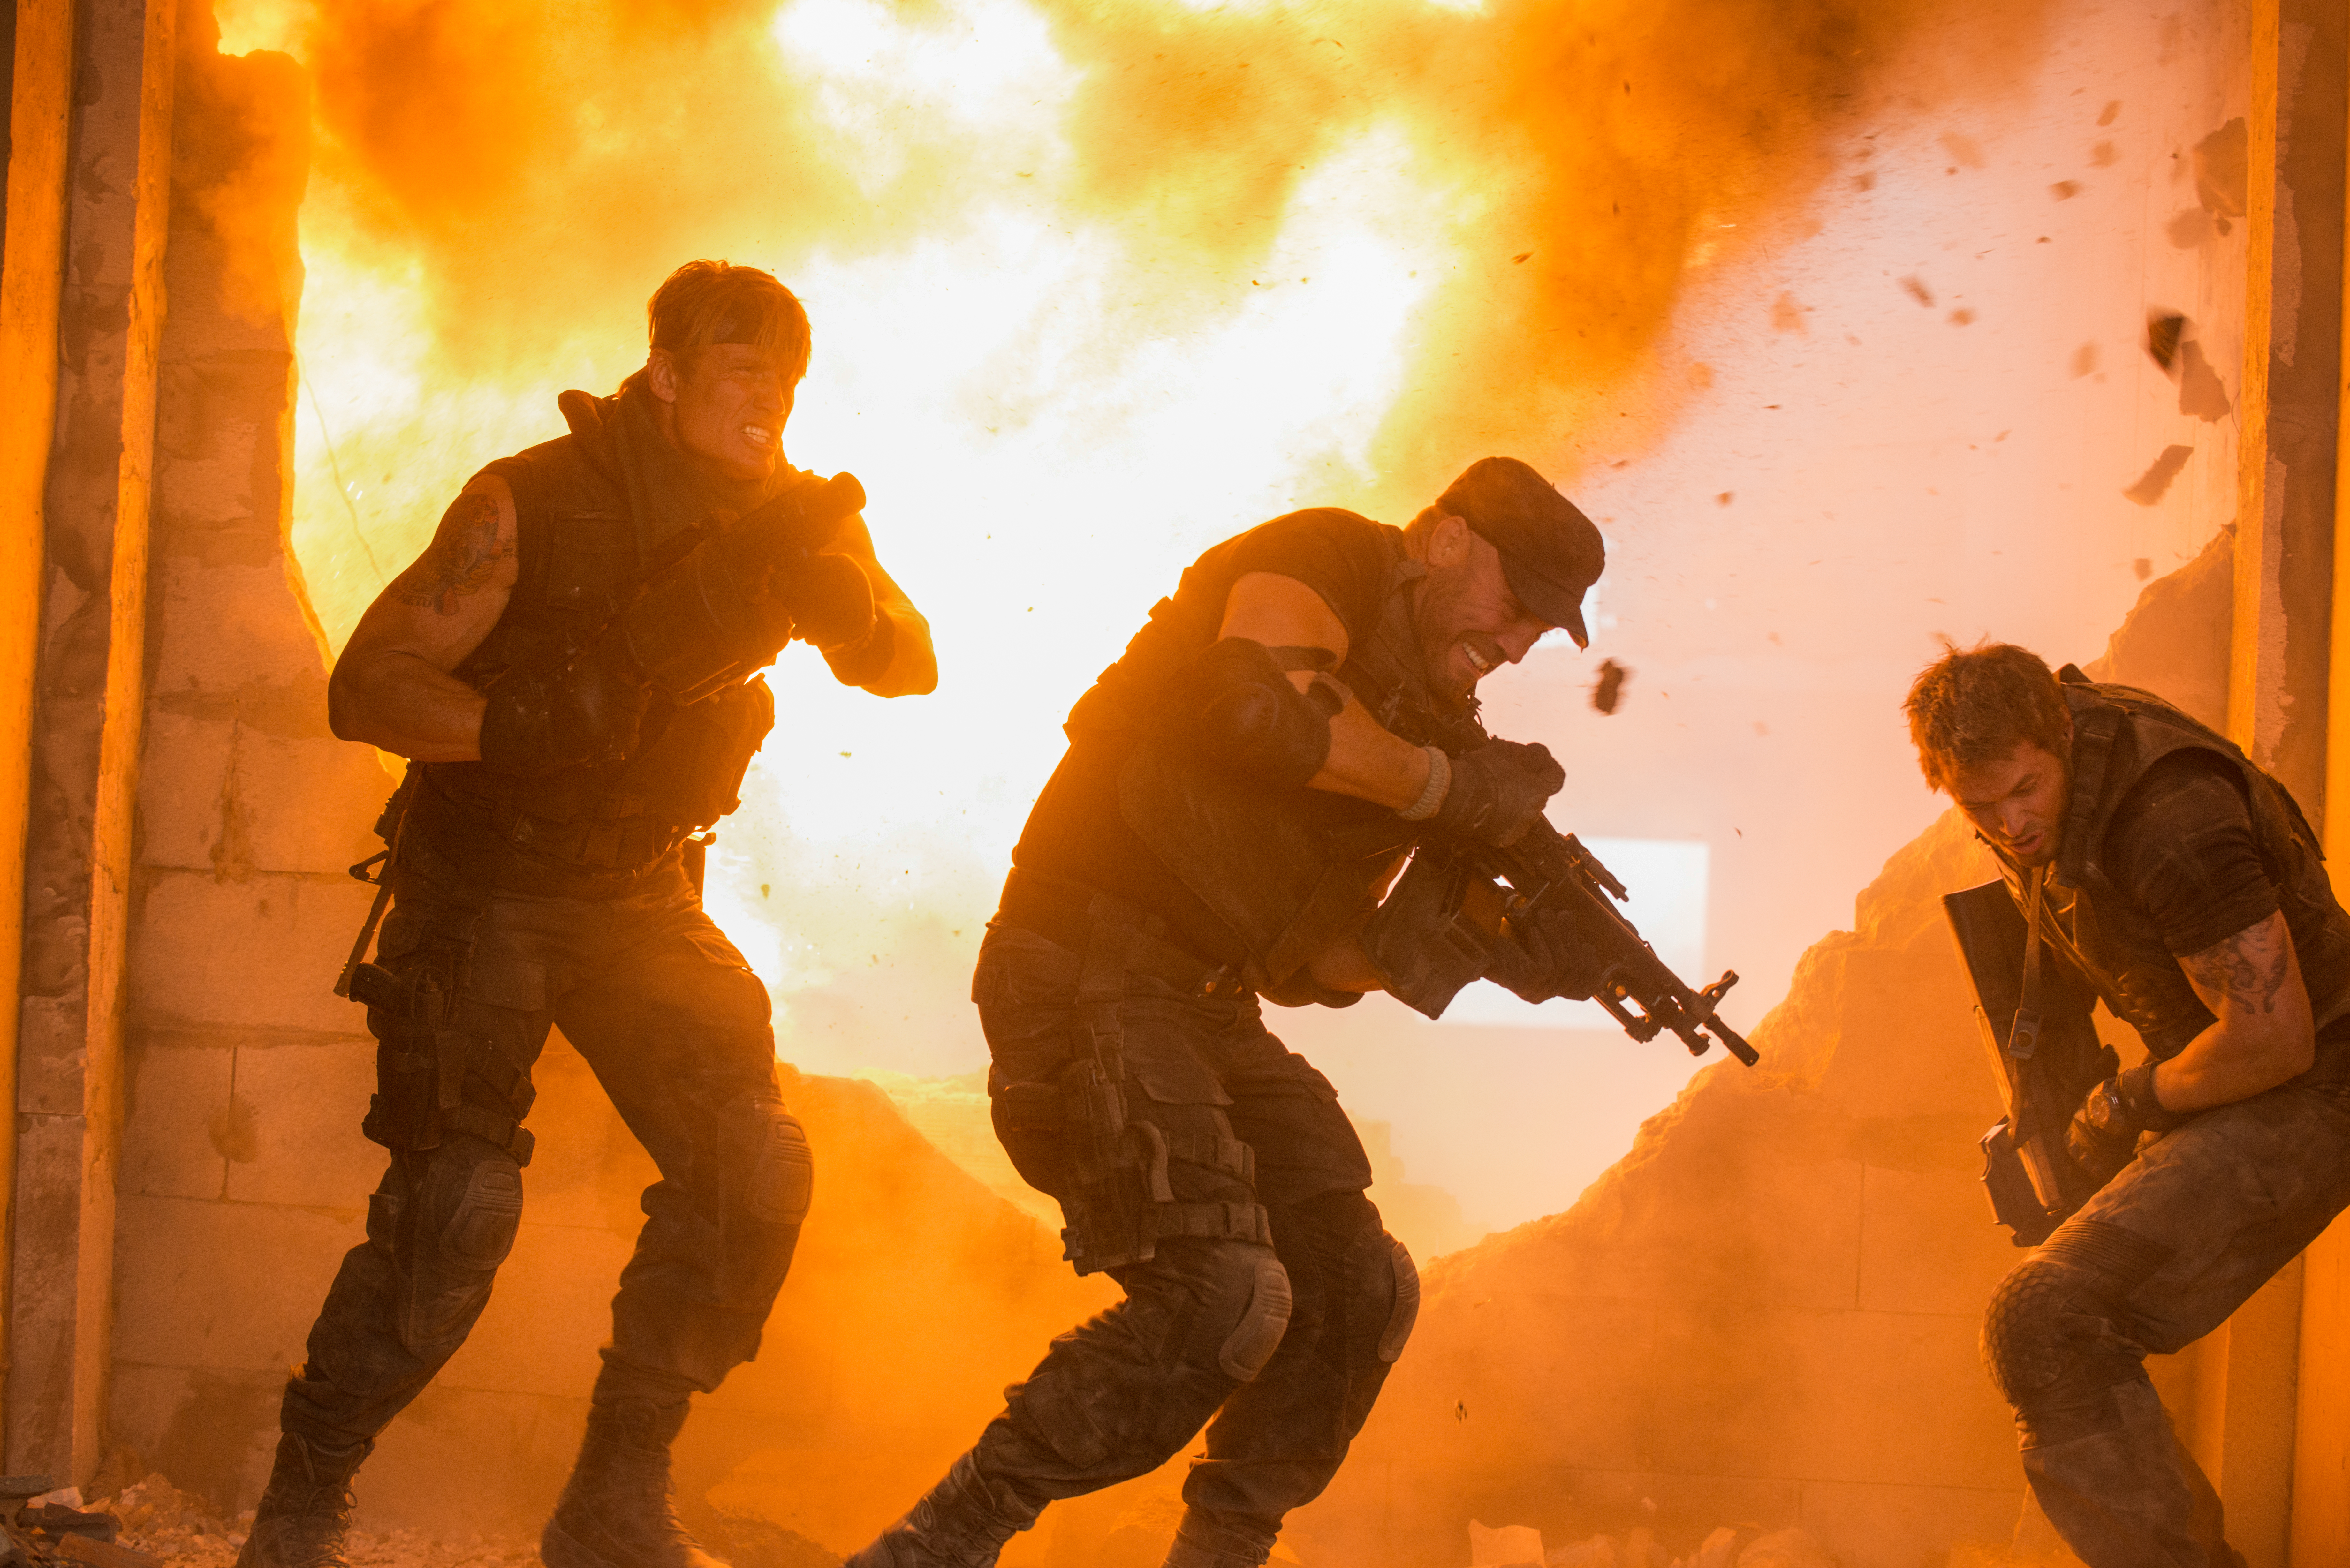 Movie The Expendables 3 HD Wallpaper | Background Image